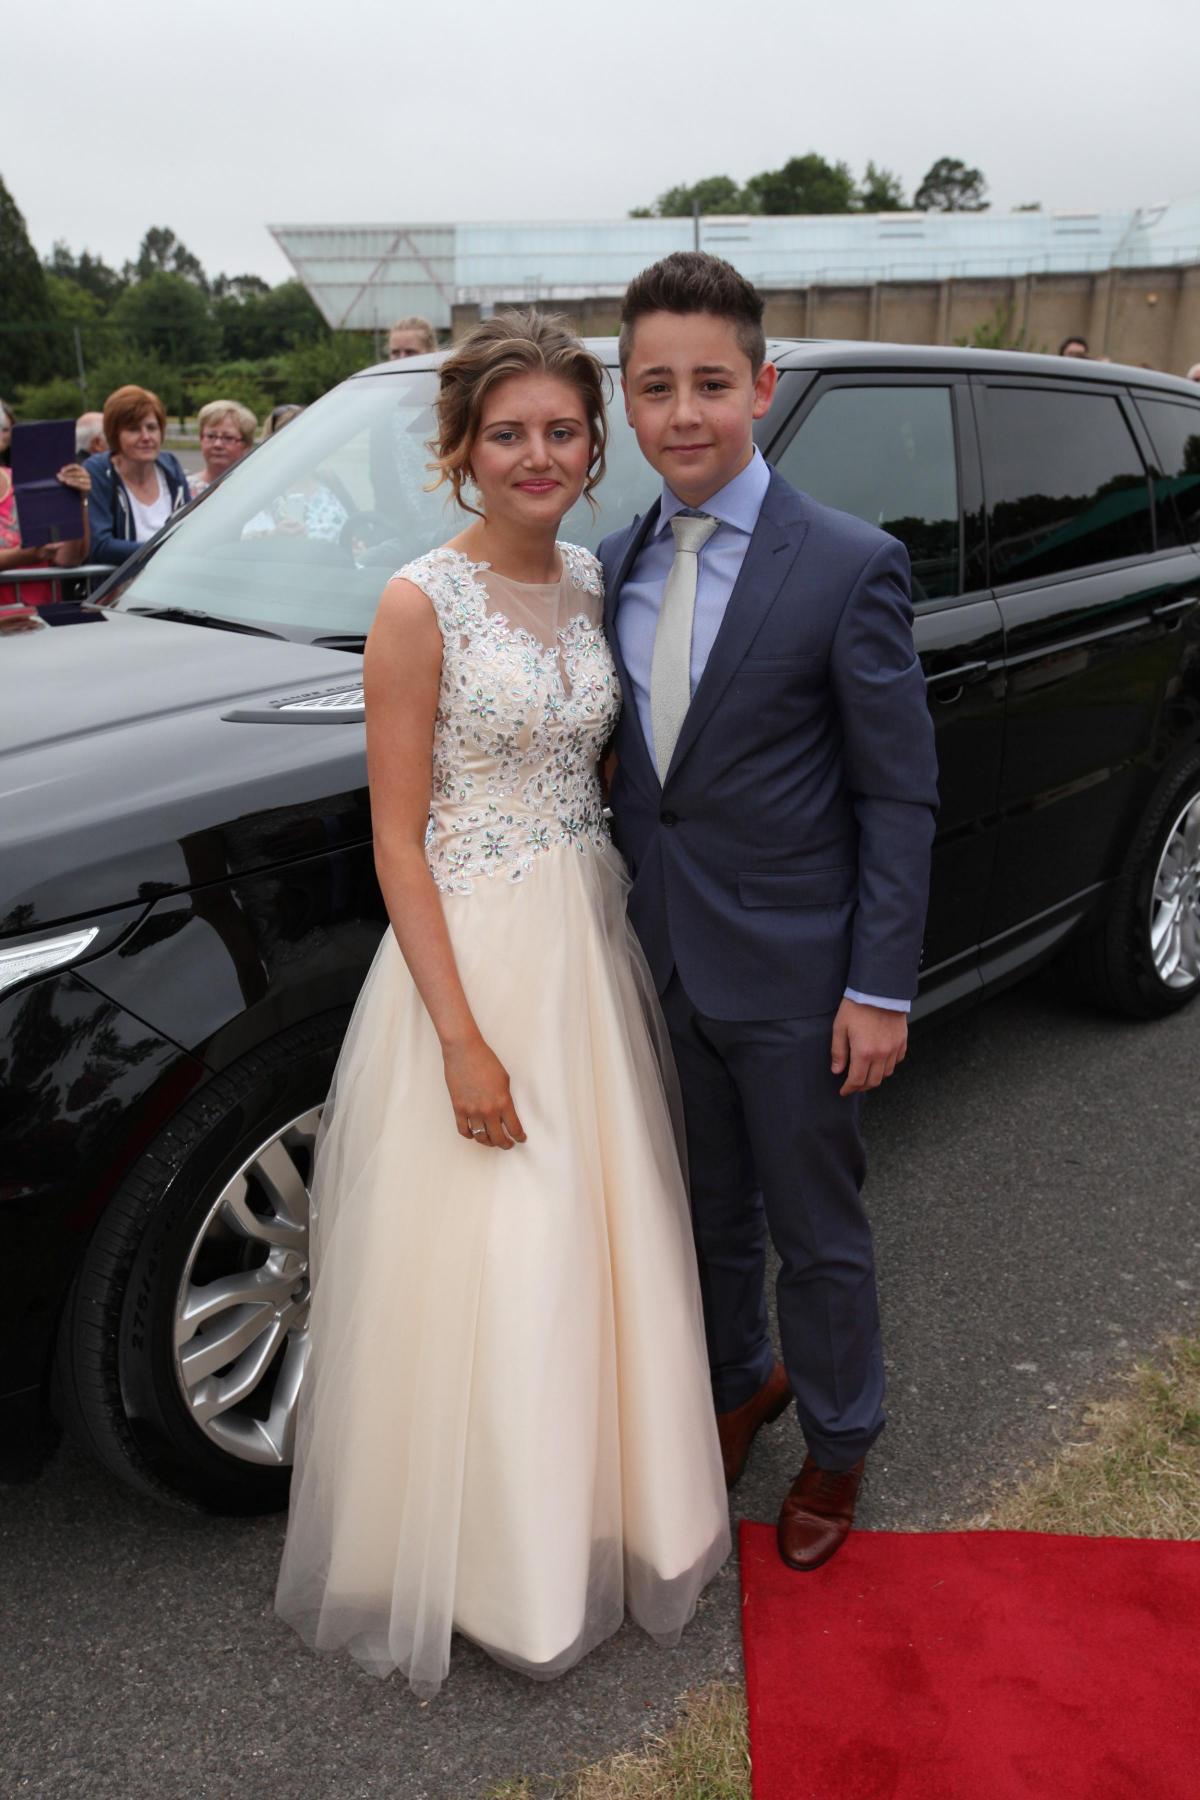 The Applemore Technology College prom